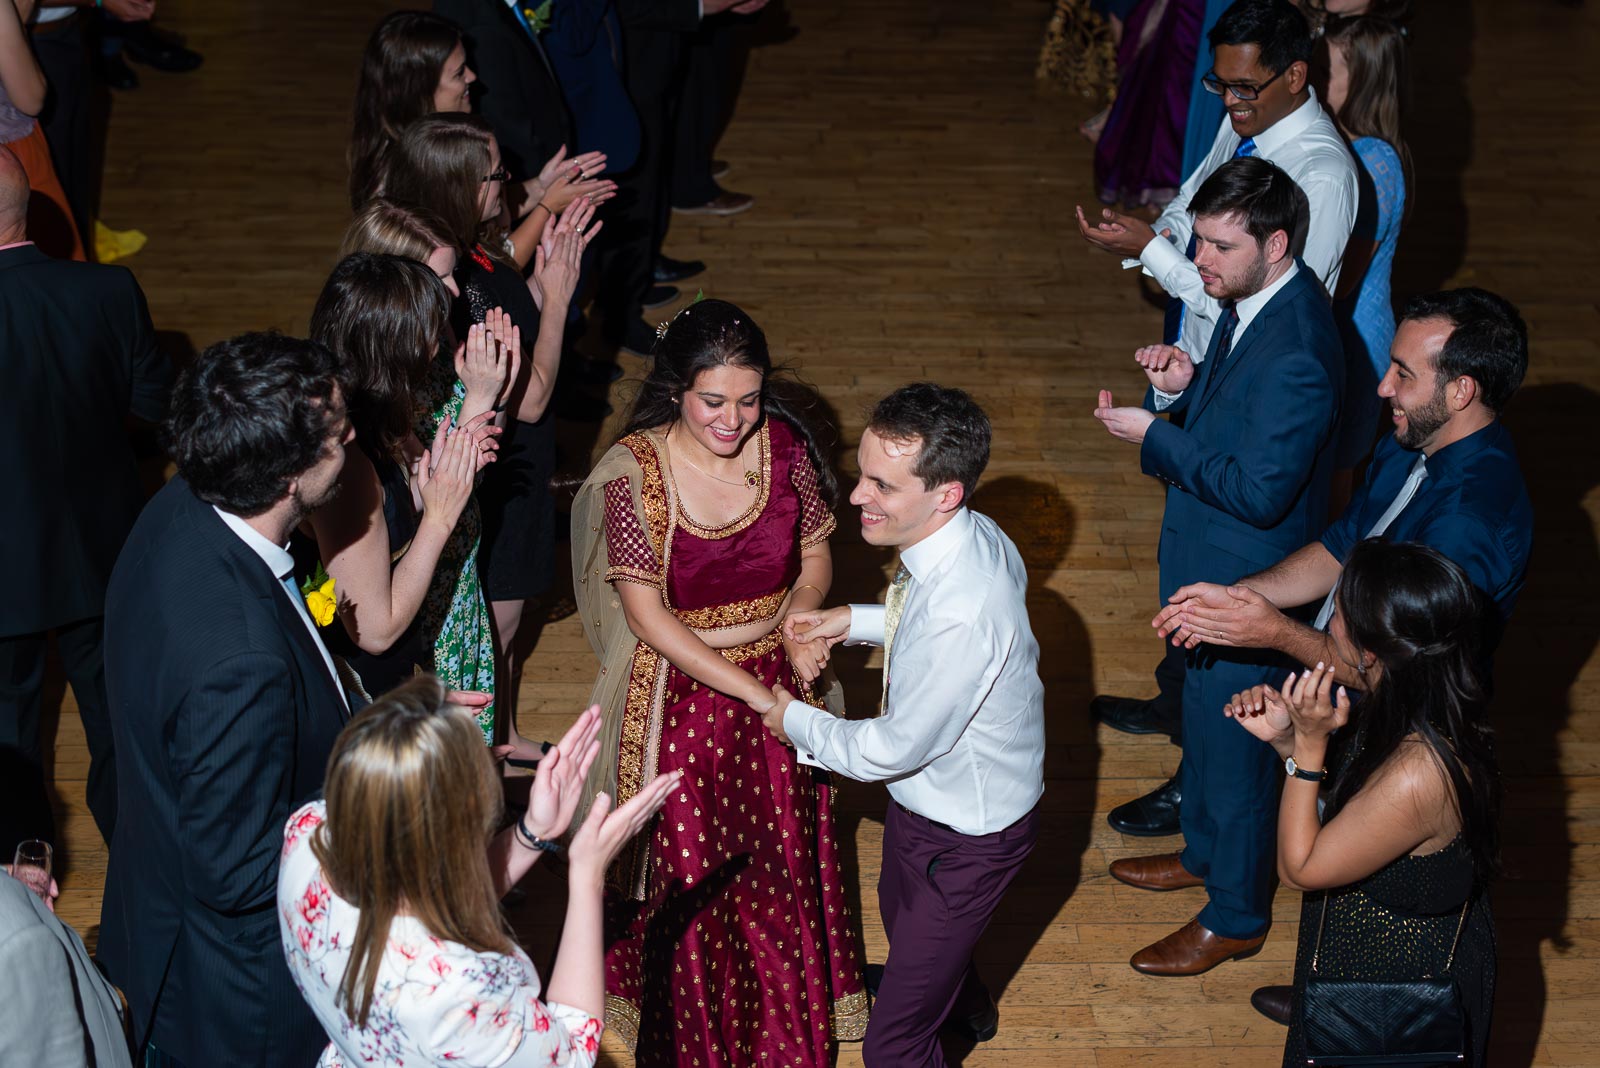 Ashley and Anjana enjoy some traditonal country dancing at their Wedding Reception in the All Saint's Centre, Lewes.